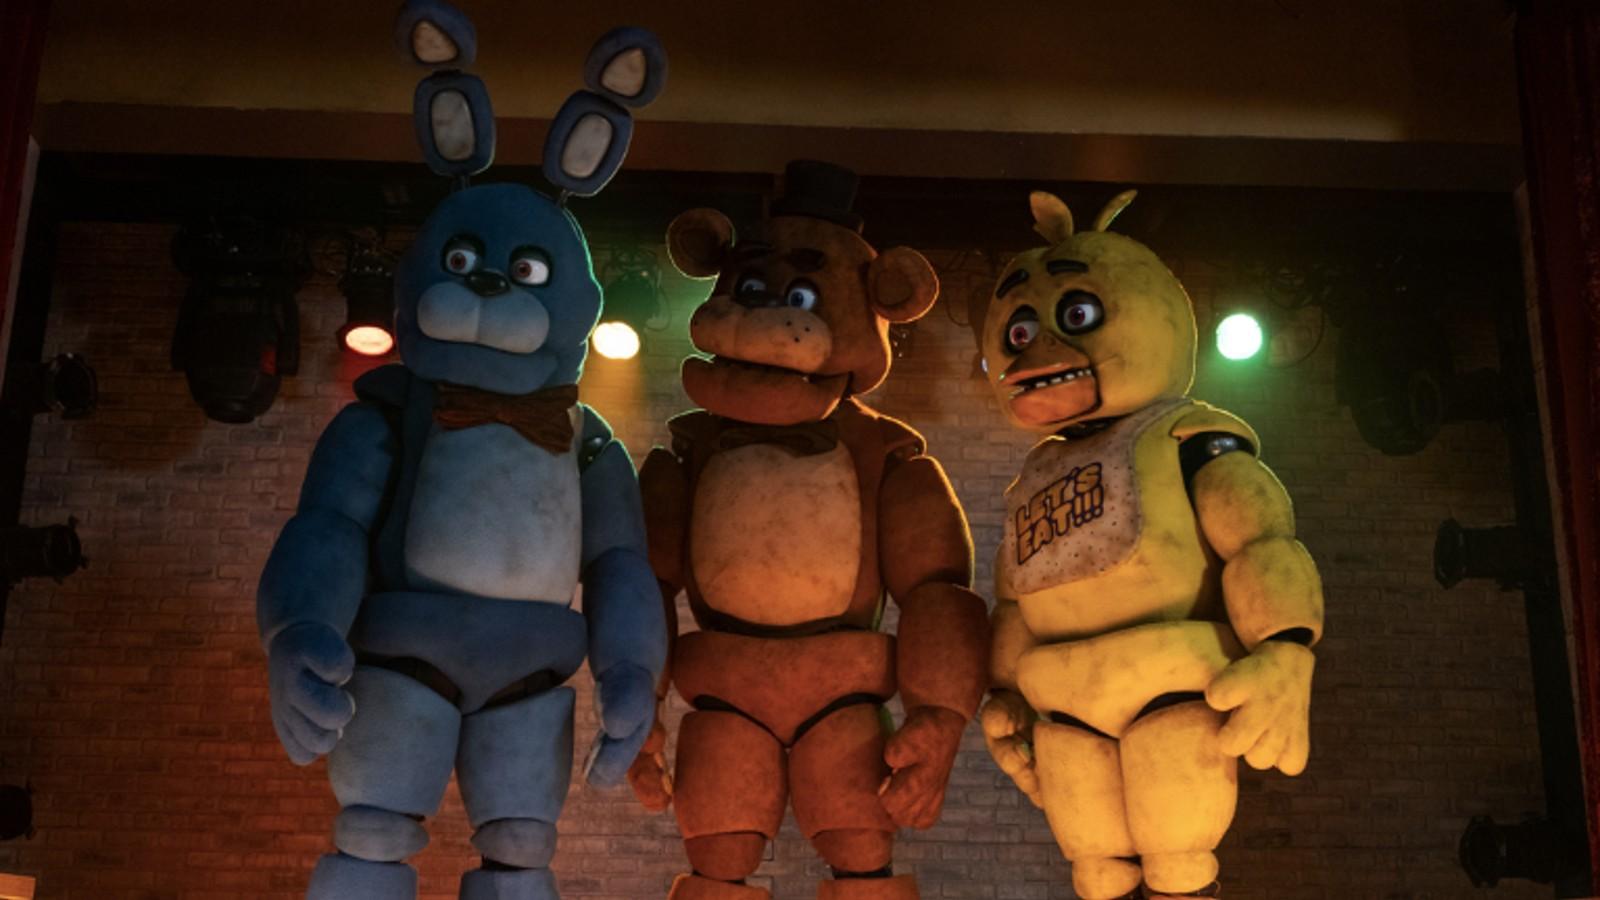 The robot mascots for Five Nights at Freddy's